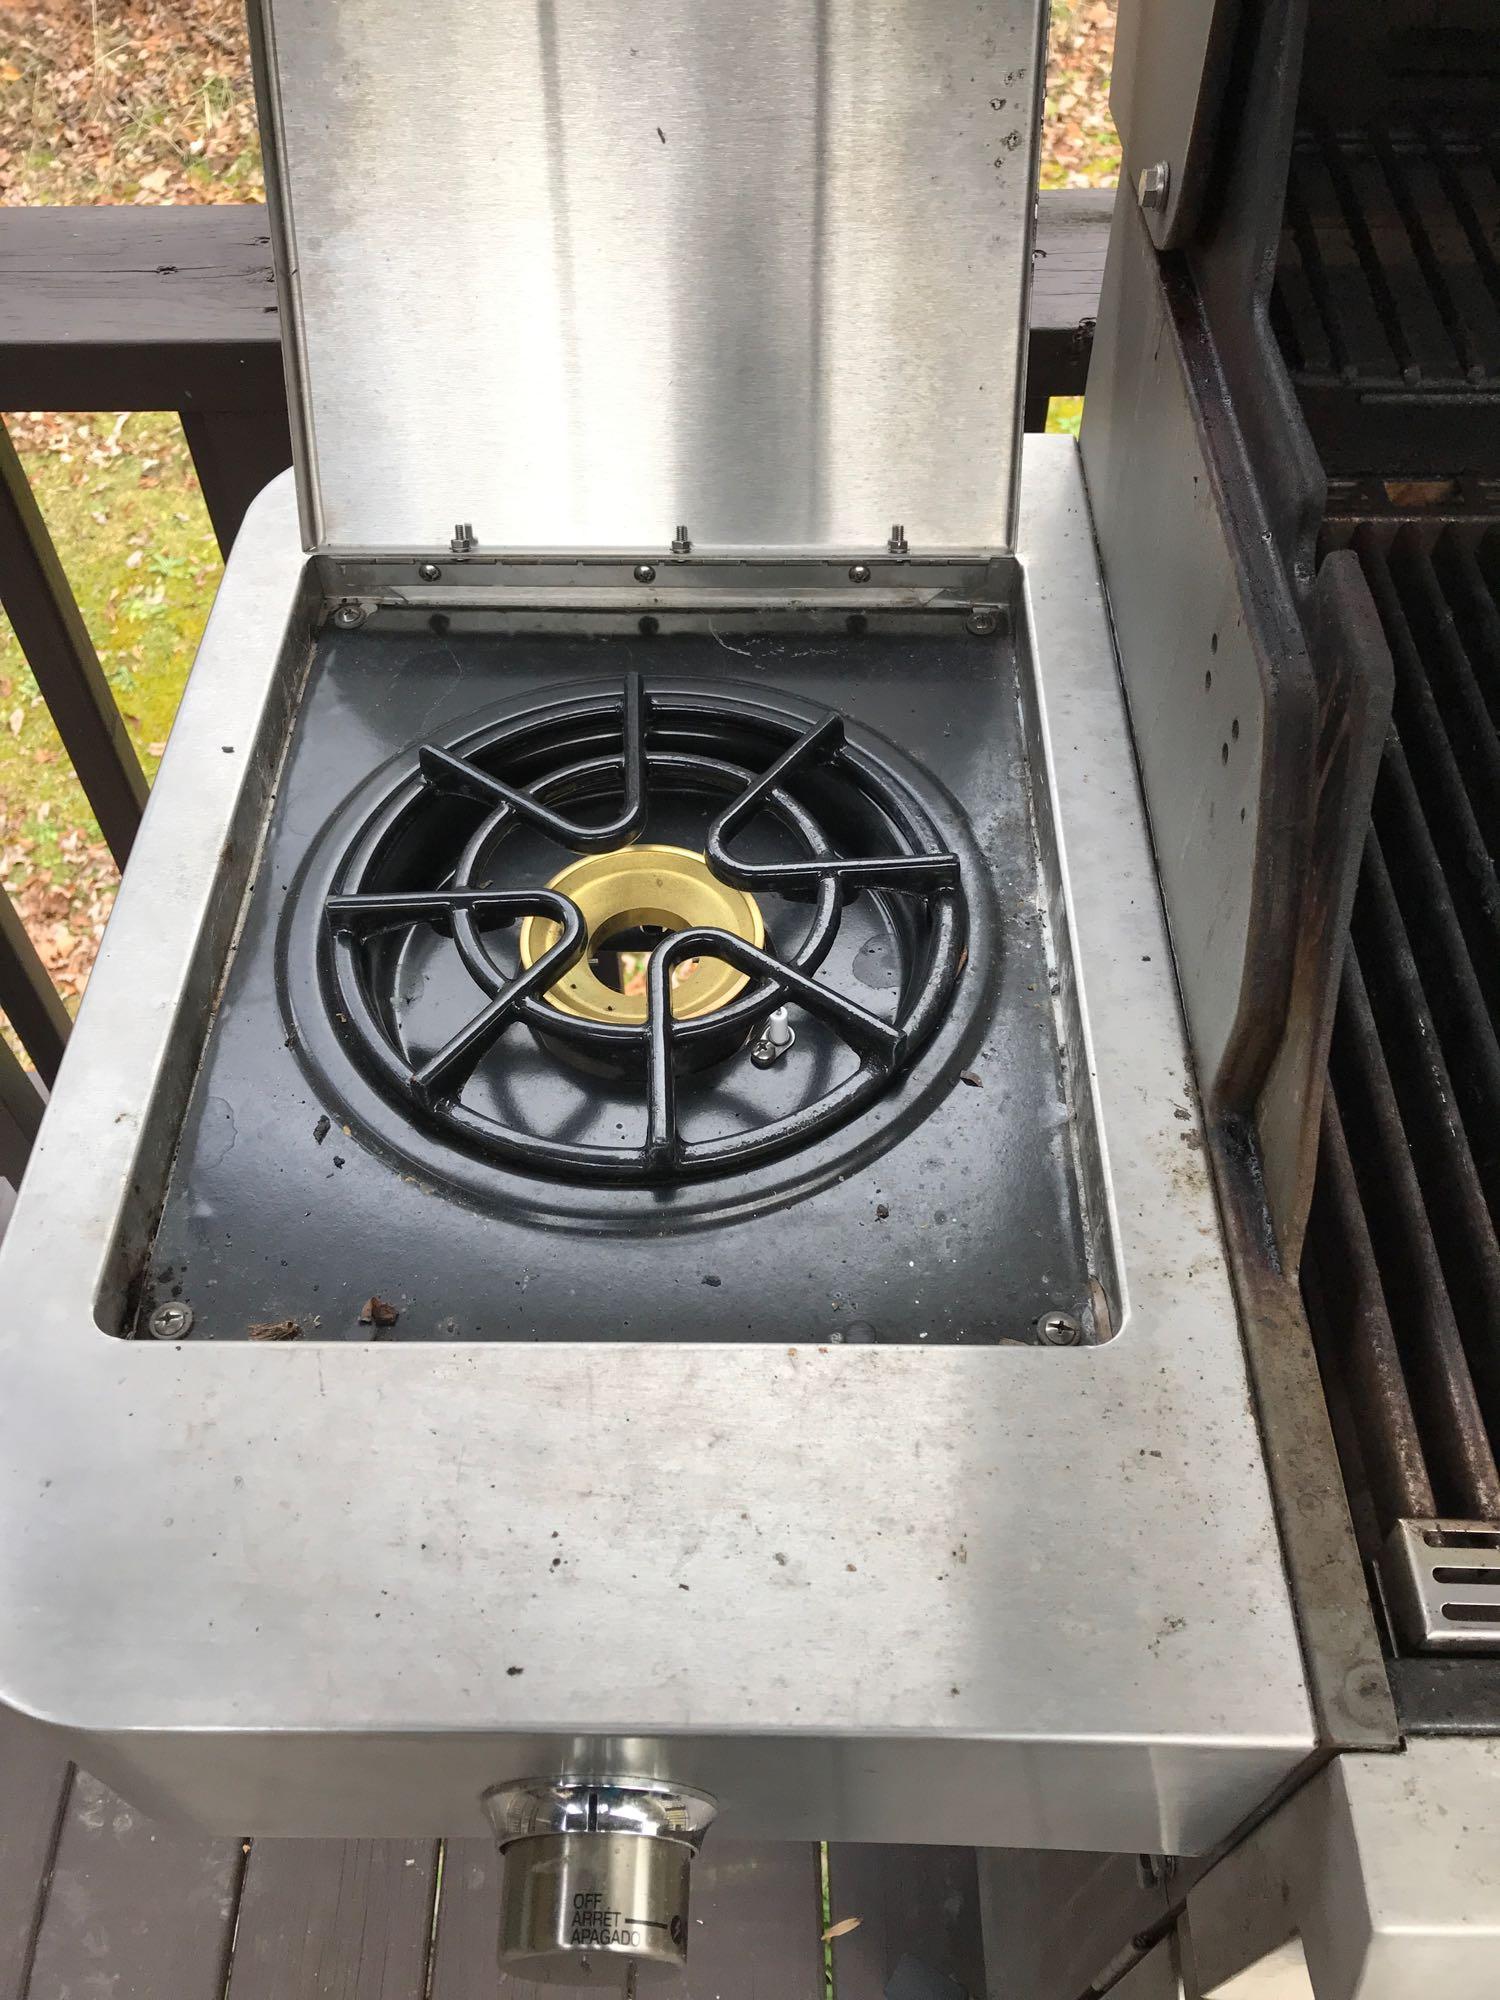 SABER Stainless Steel Propane Grill